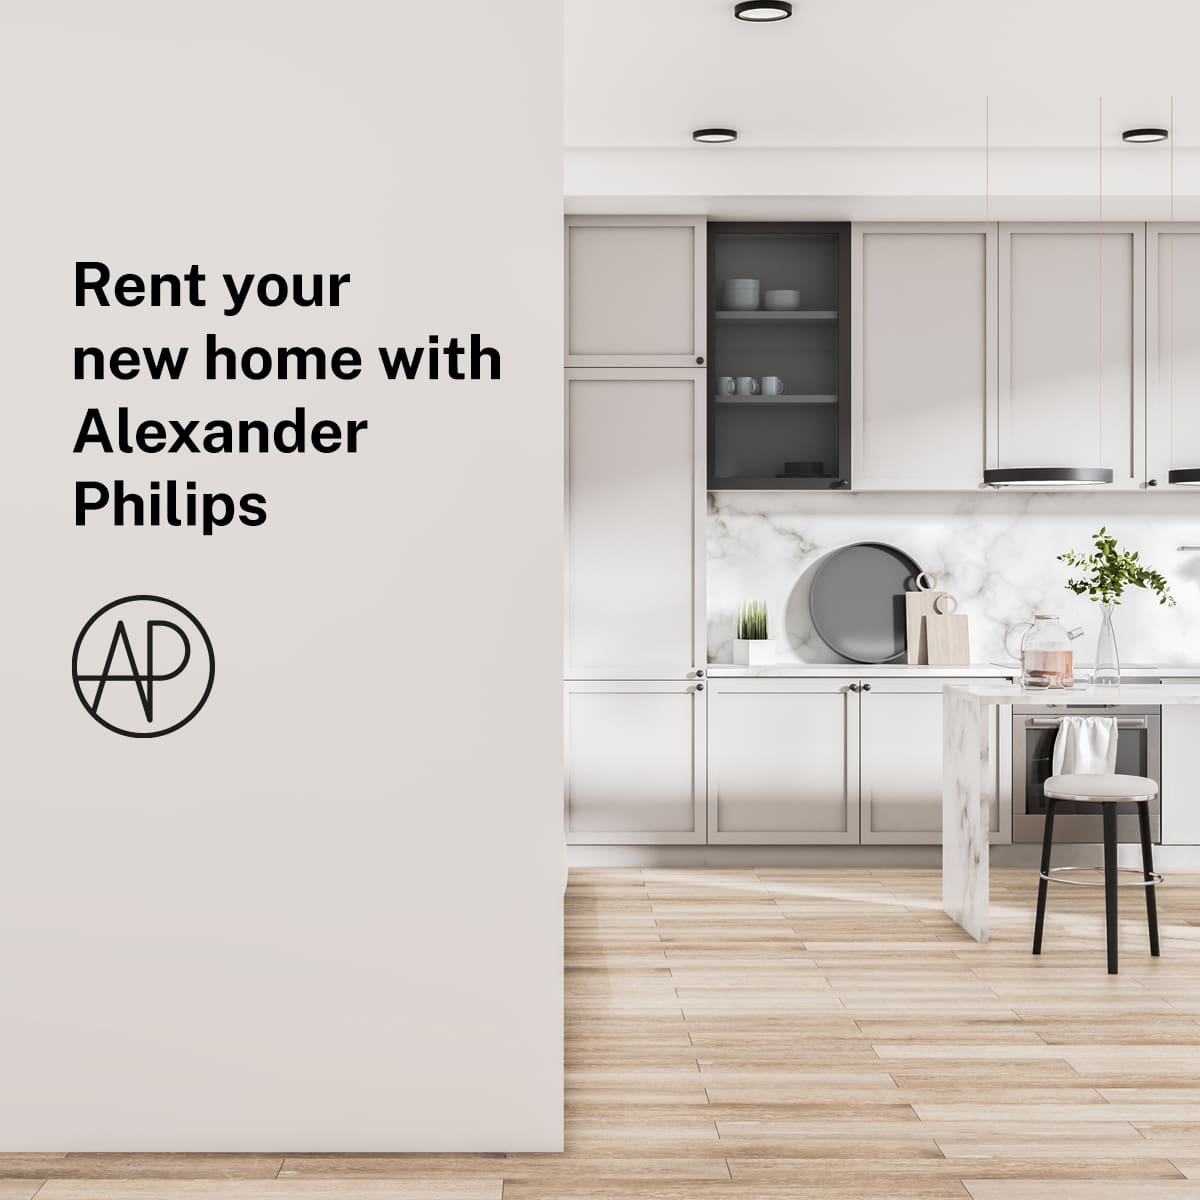 rent your home with Alexander Philips